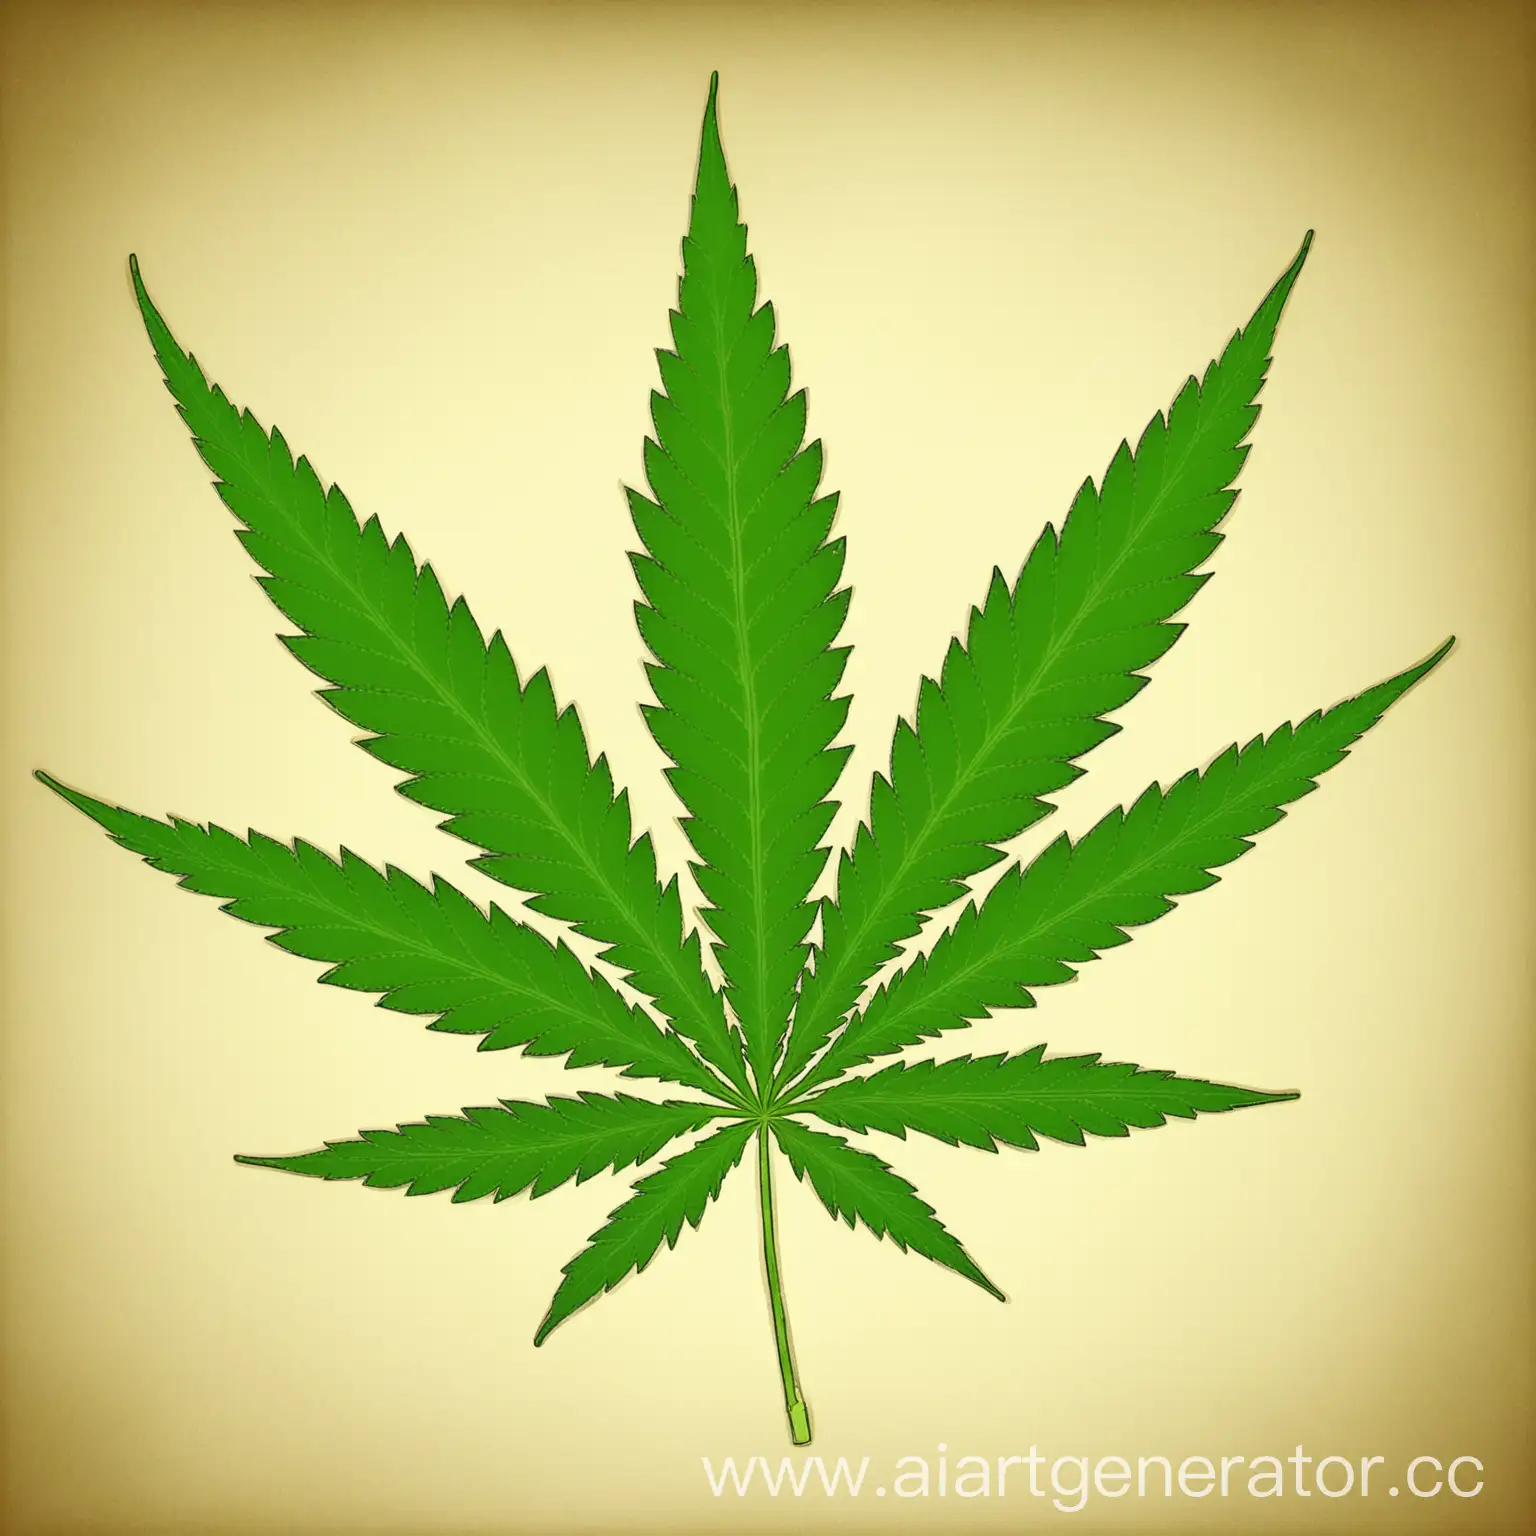 Vibrant-Cannabis-Leaf-Illustration-on-Psychedelic-Background